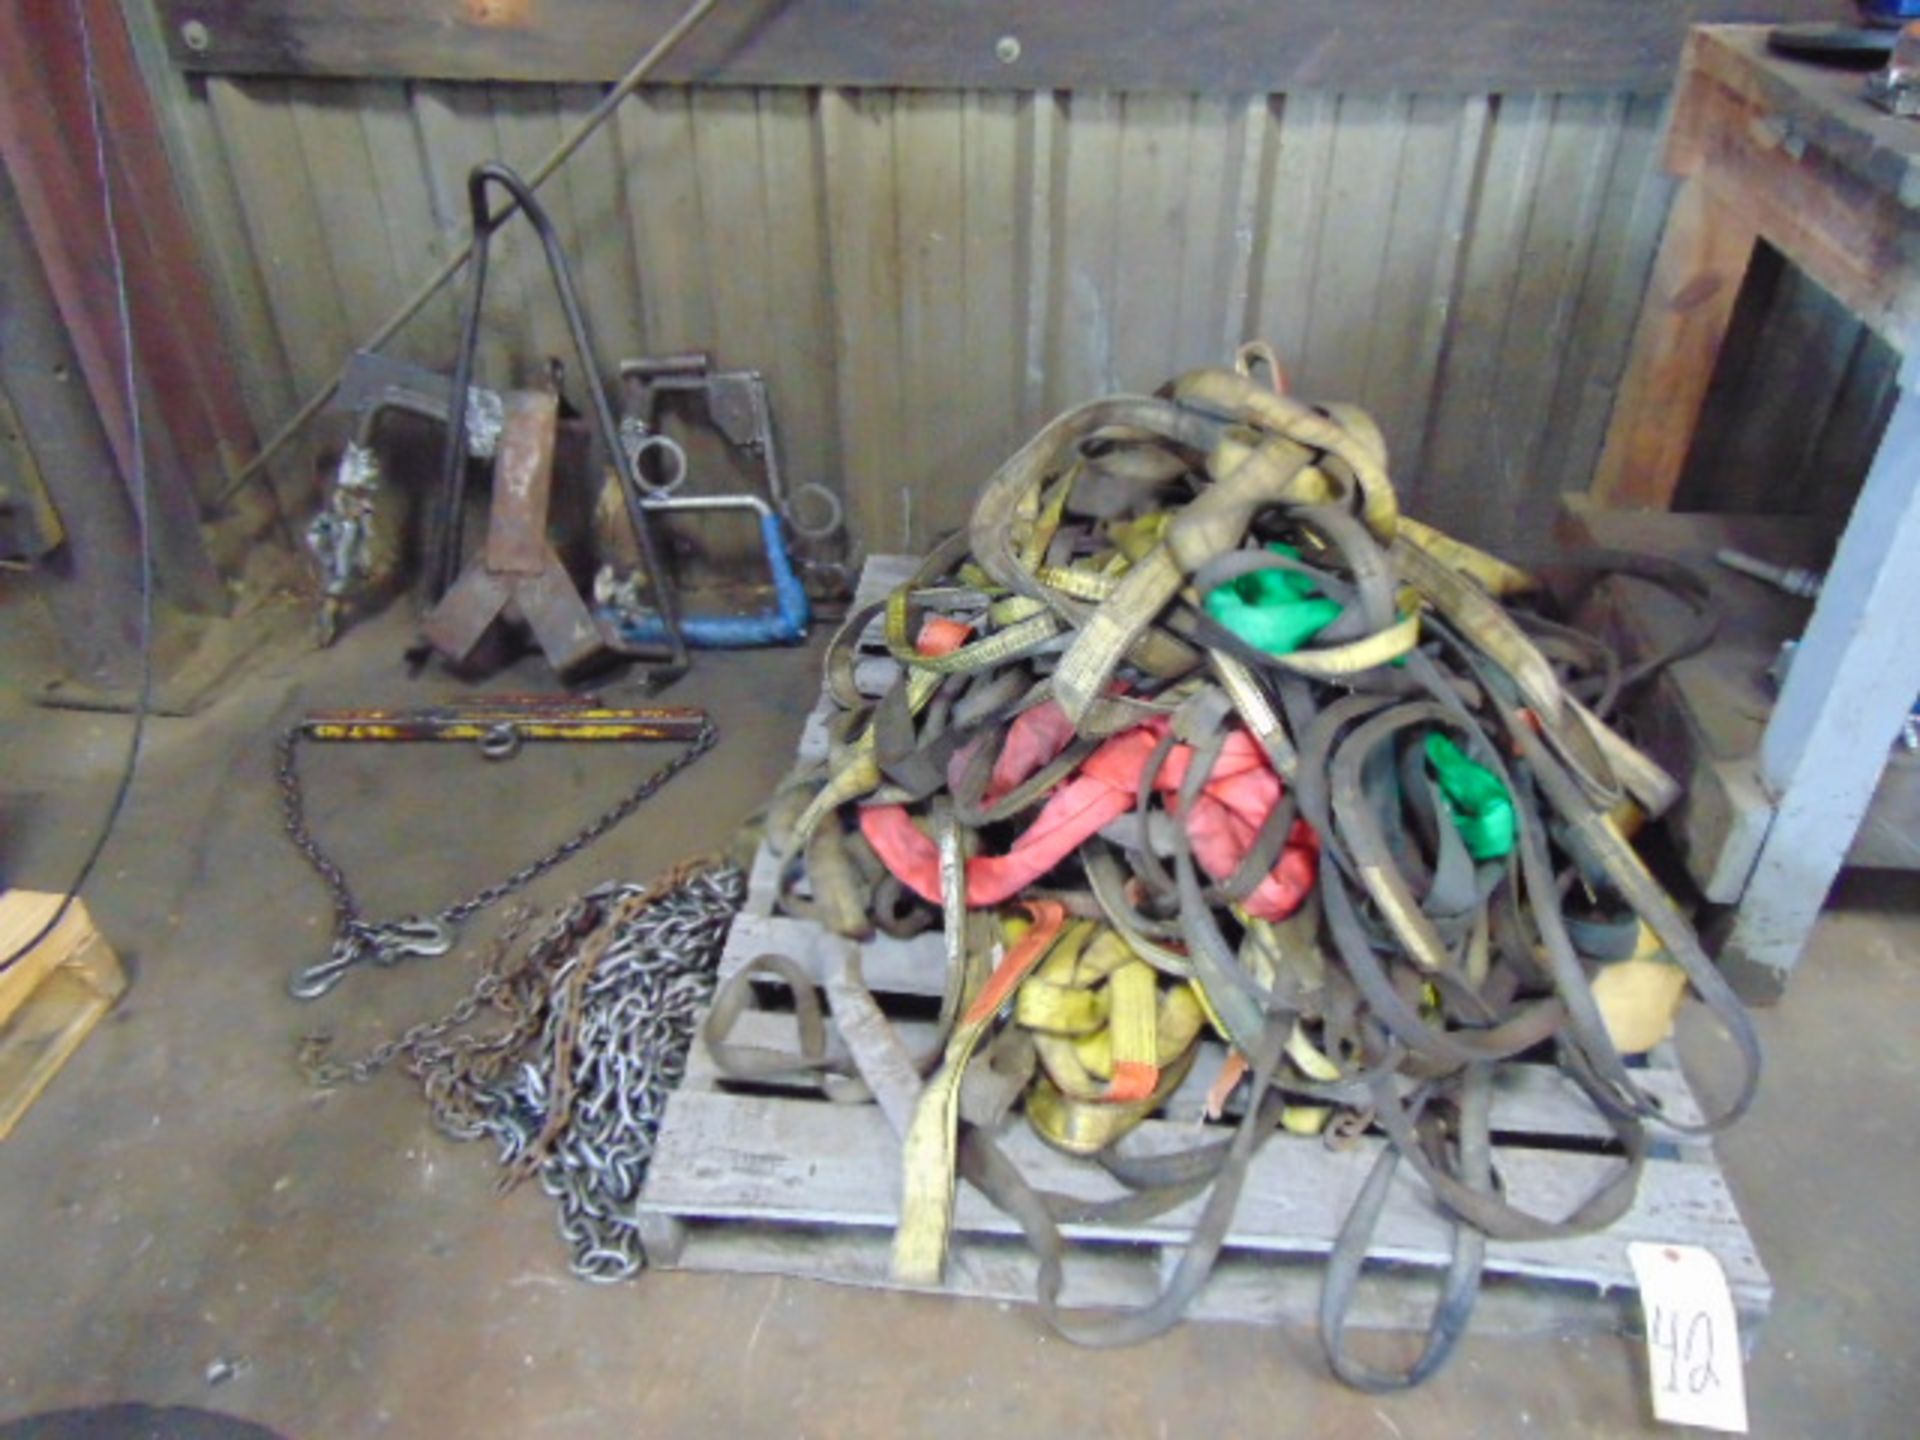 LOT CONSISTING OF: slings & lifting hooks, assorted